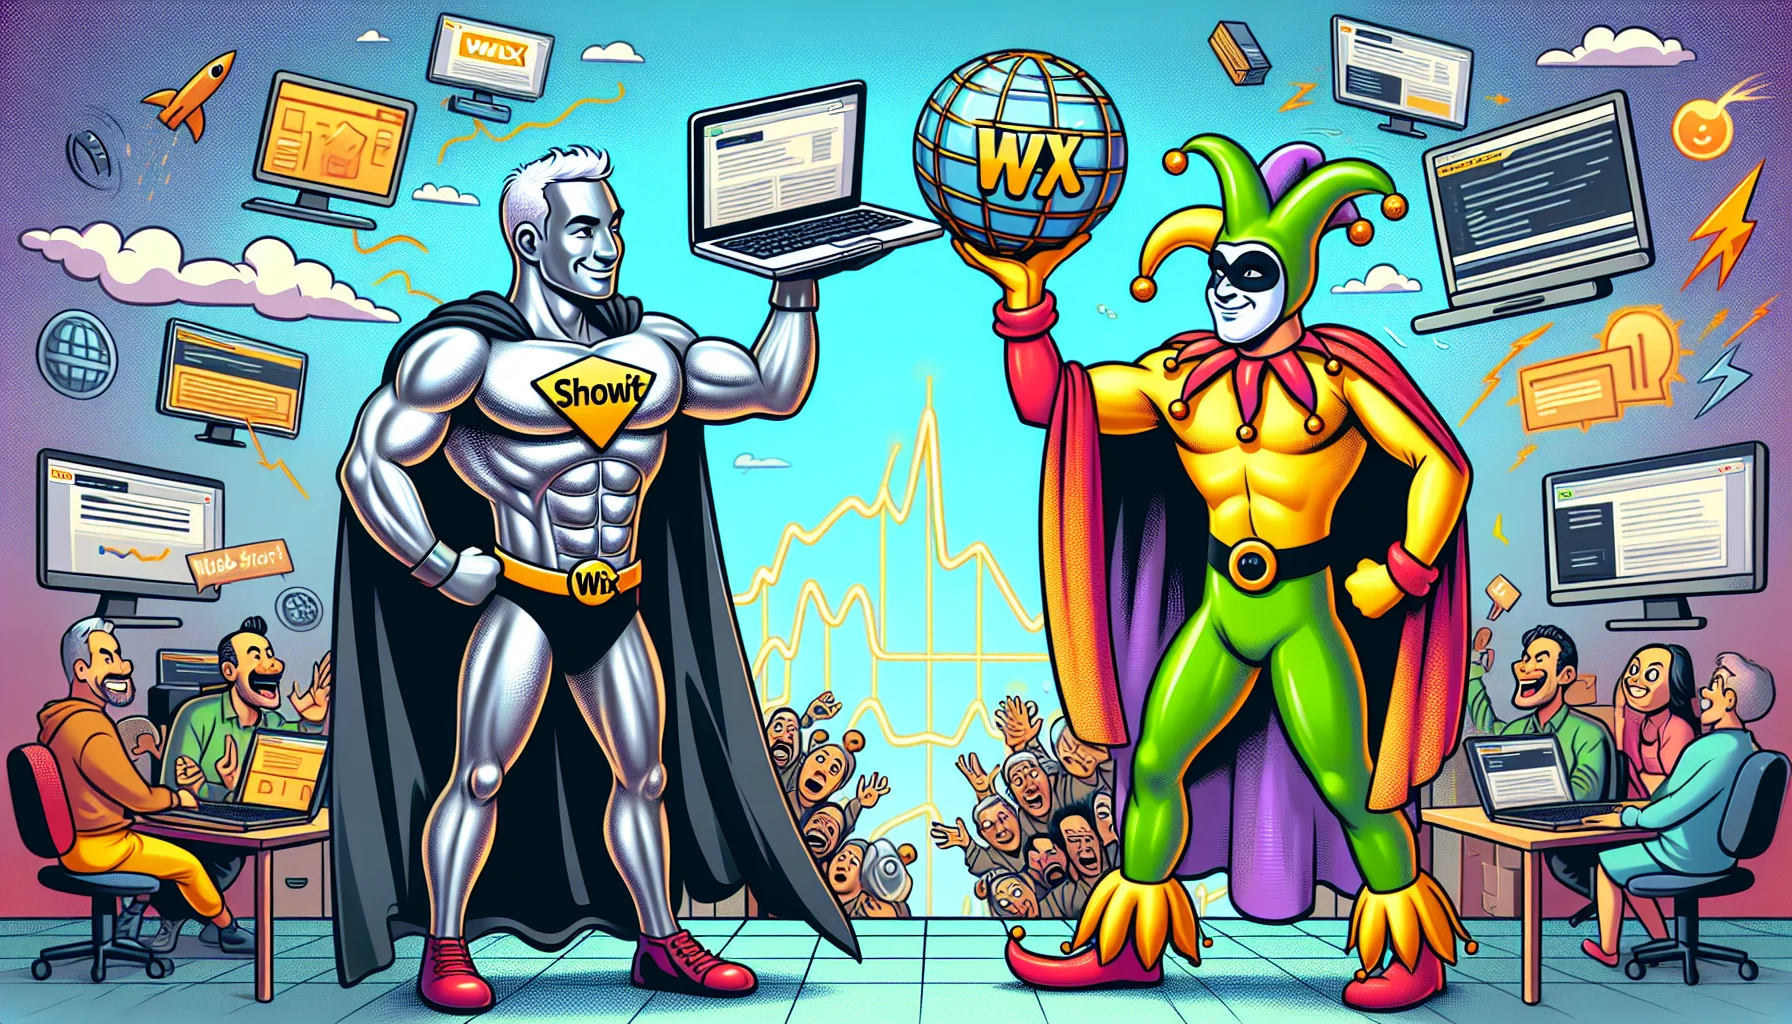 Imagine a humorous scenario where two superhero characters, representing Showit and Wix, are in a competition for web hosting supremacy. The Showit superhero is a silver-skinned good-humored character with a laptop sign as their symbol, while the Wix superhero is a gold-skinned jester-like character with a globe sign as their symbol. Both of them are in a comic-styled environment, filled with visual metaphors and symbolism reflecting the ups and downs of web hosting, like fluctuating web traffic and wifi signals. Both characters are trying amusingly to outperform each other by showcasing their hosting prowess.